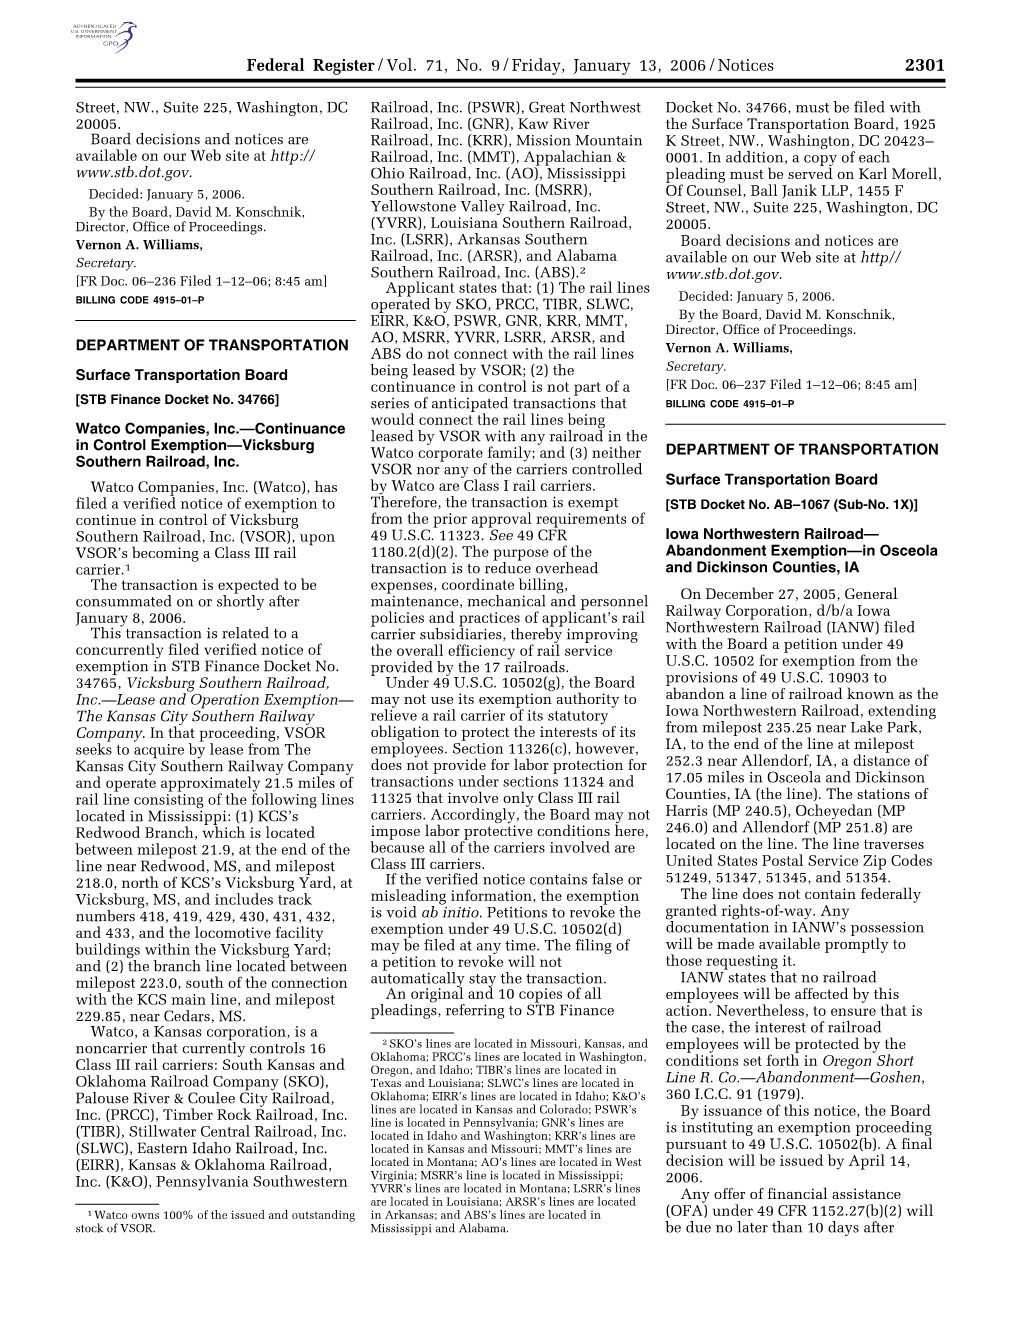 Federal Register/Vol. 71, No. 9/Friday, January 13, 2006/Notices